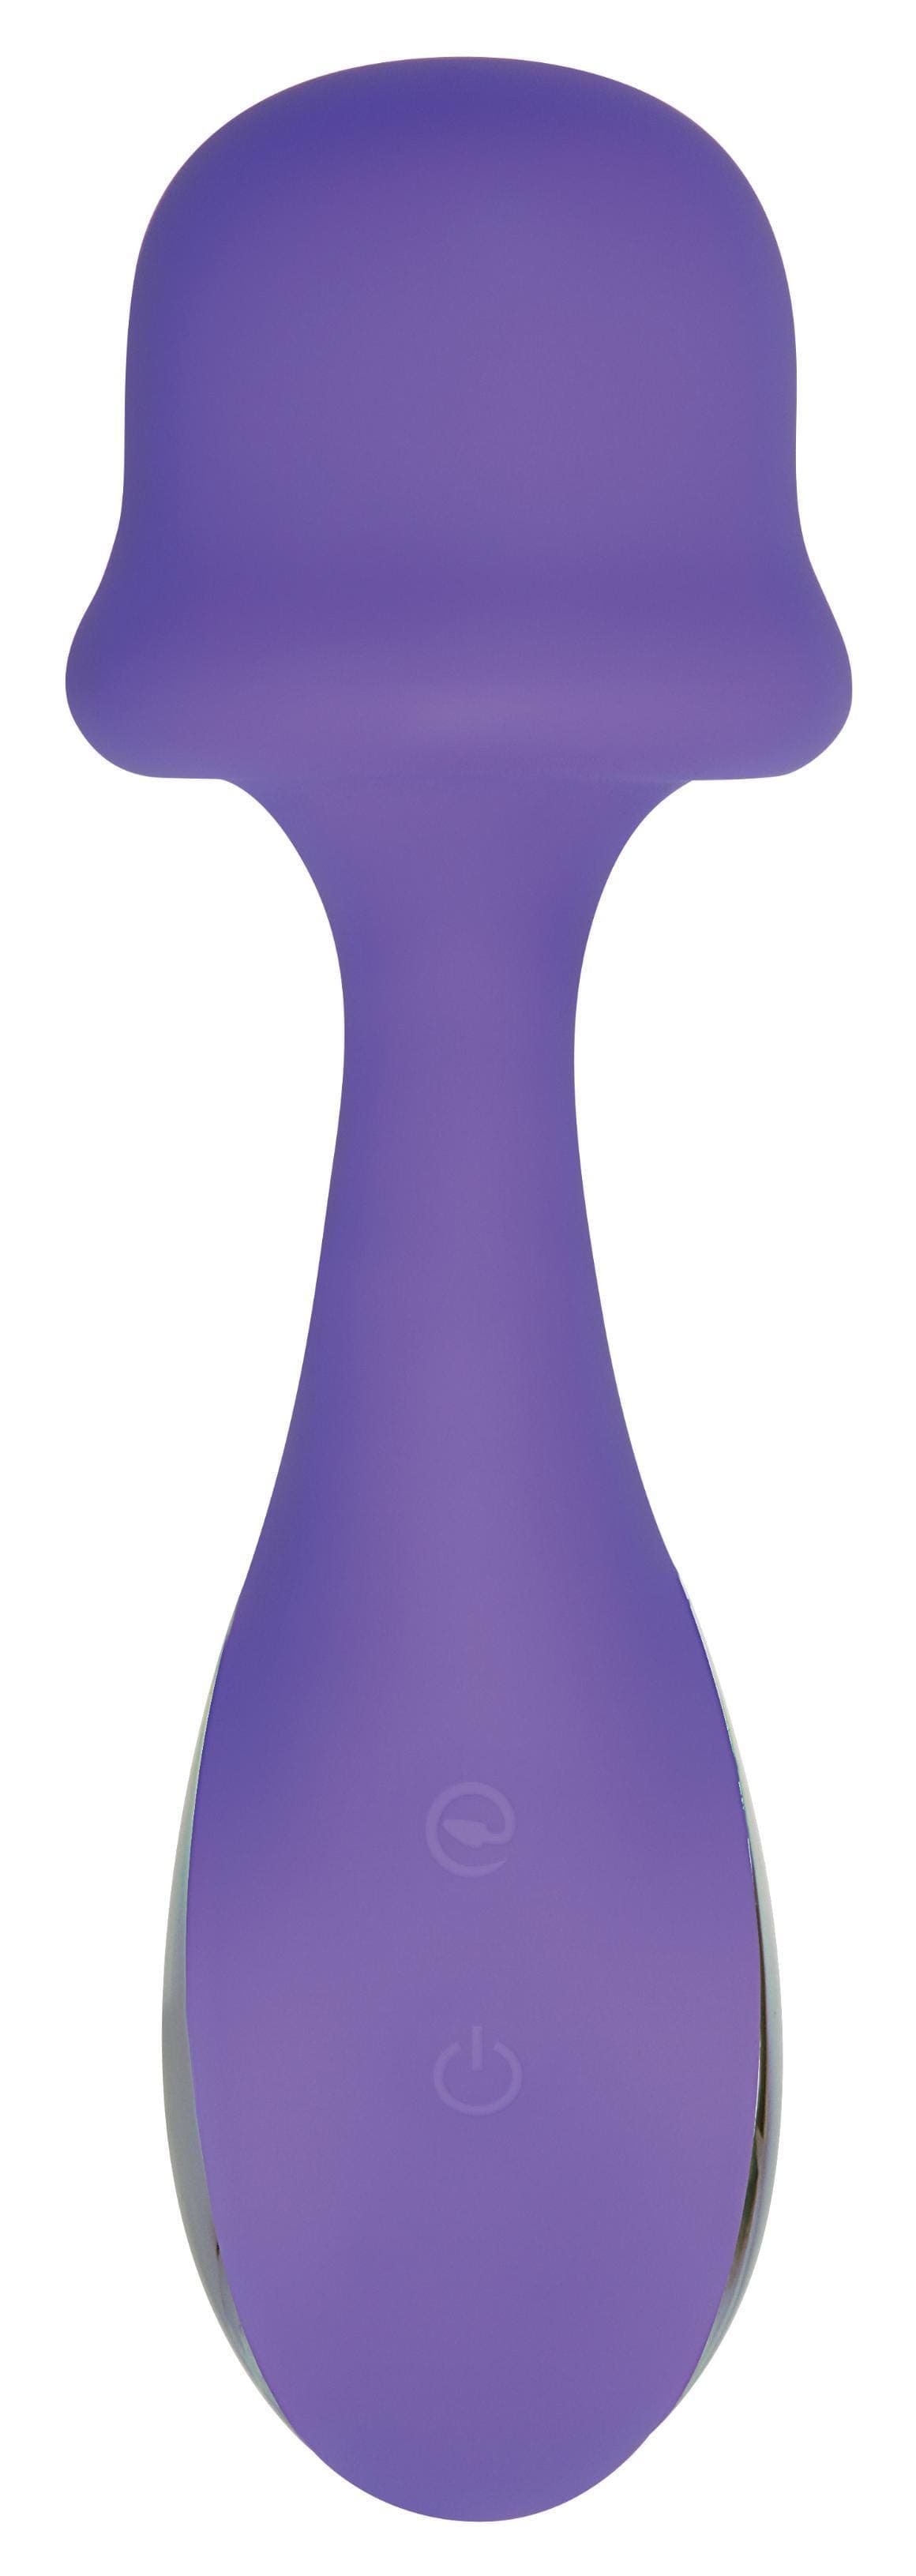 adam and eve the sensual touch wand massager purple